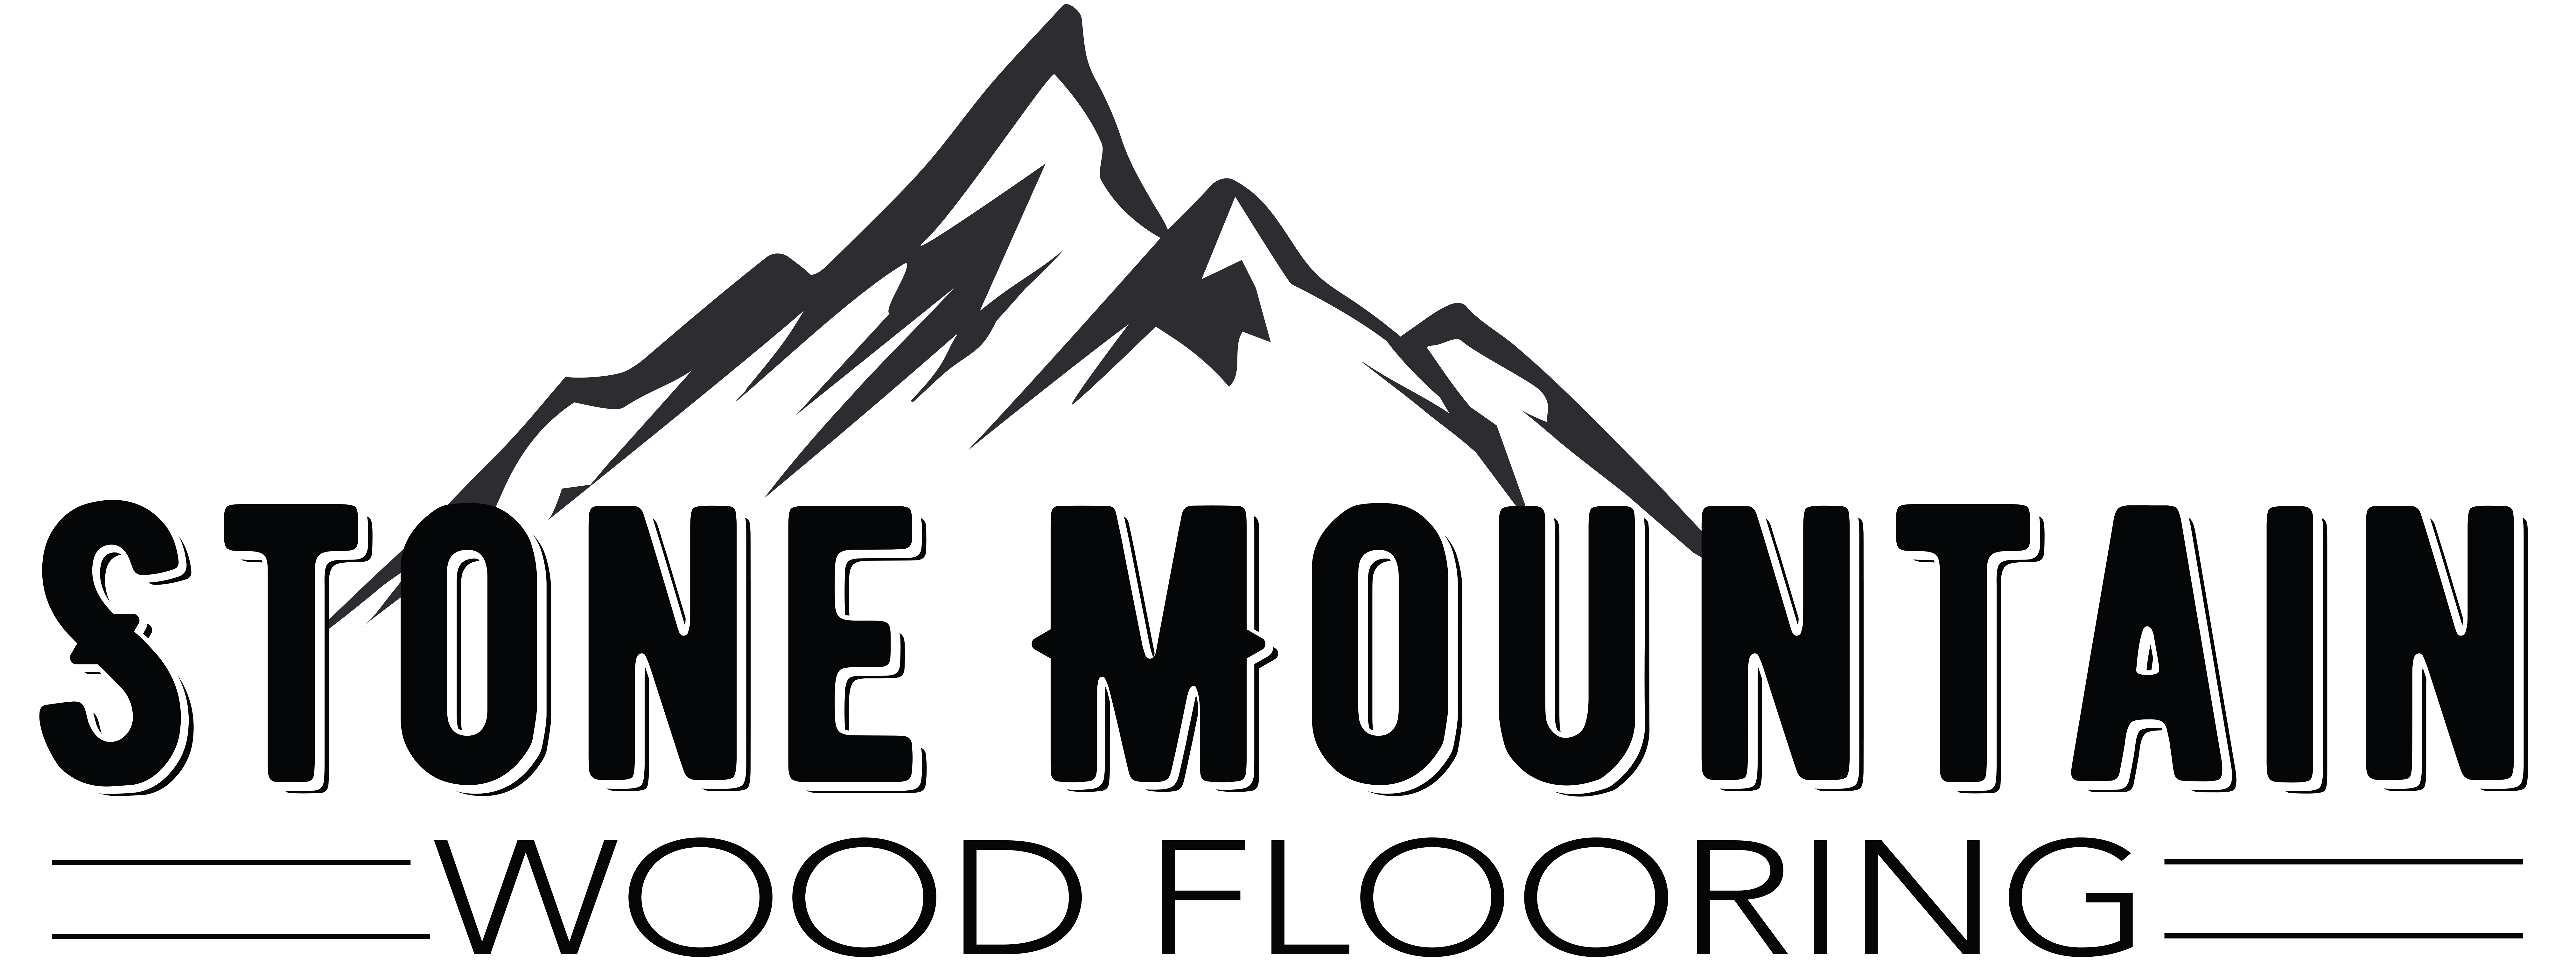 Stone Moutain Wood Flooring quality hardwood floors at cheap prices